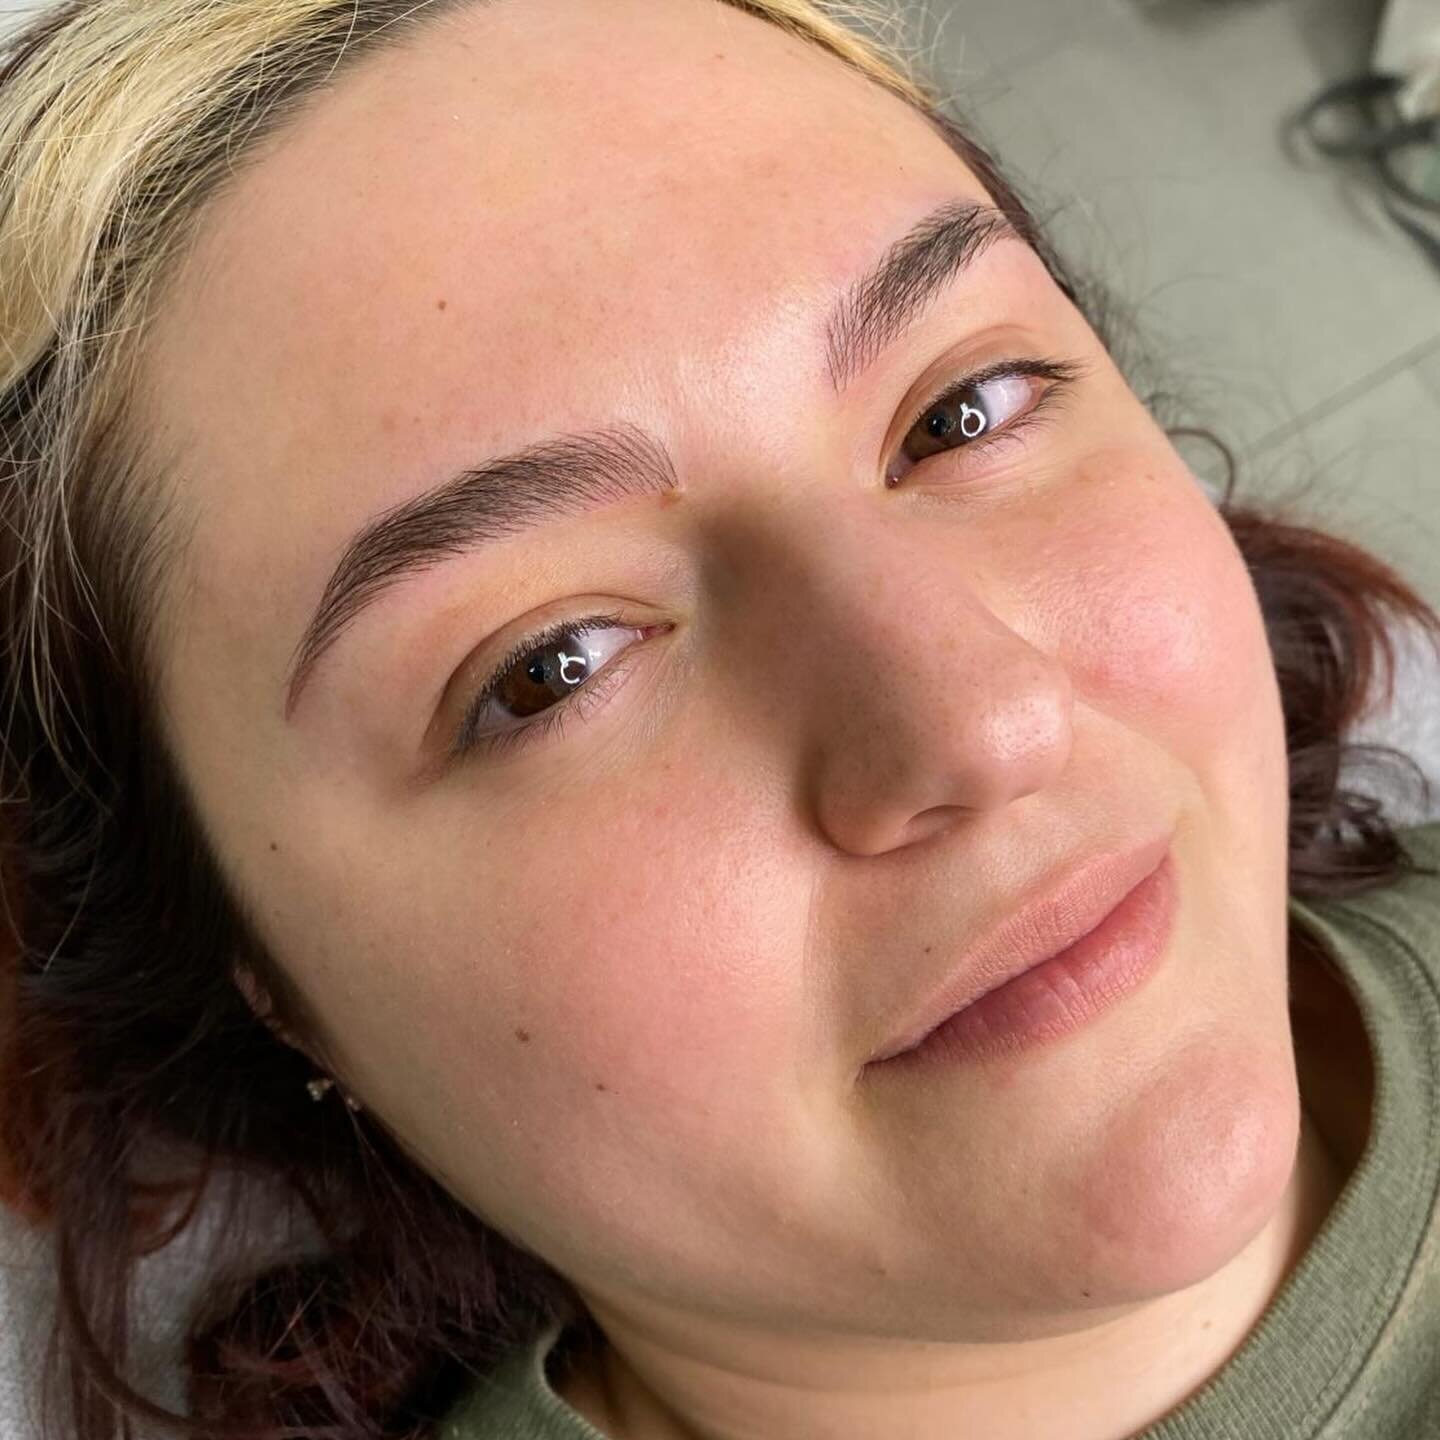 Bella Vita Microbladed Brows 🔥Pure tattoo brow perfection. Cant even tell it&rsquo;s a tattoo it looks so natural! Swipe to see the before 👀😍#explore
#laredotexas
#laredoute
#laredoboutiques  #laredouteinterieurs #laredolocal #laredos #laredoboots